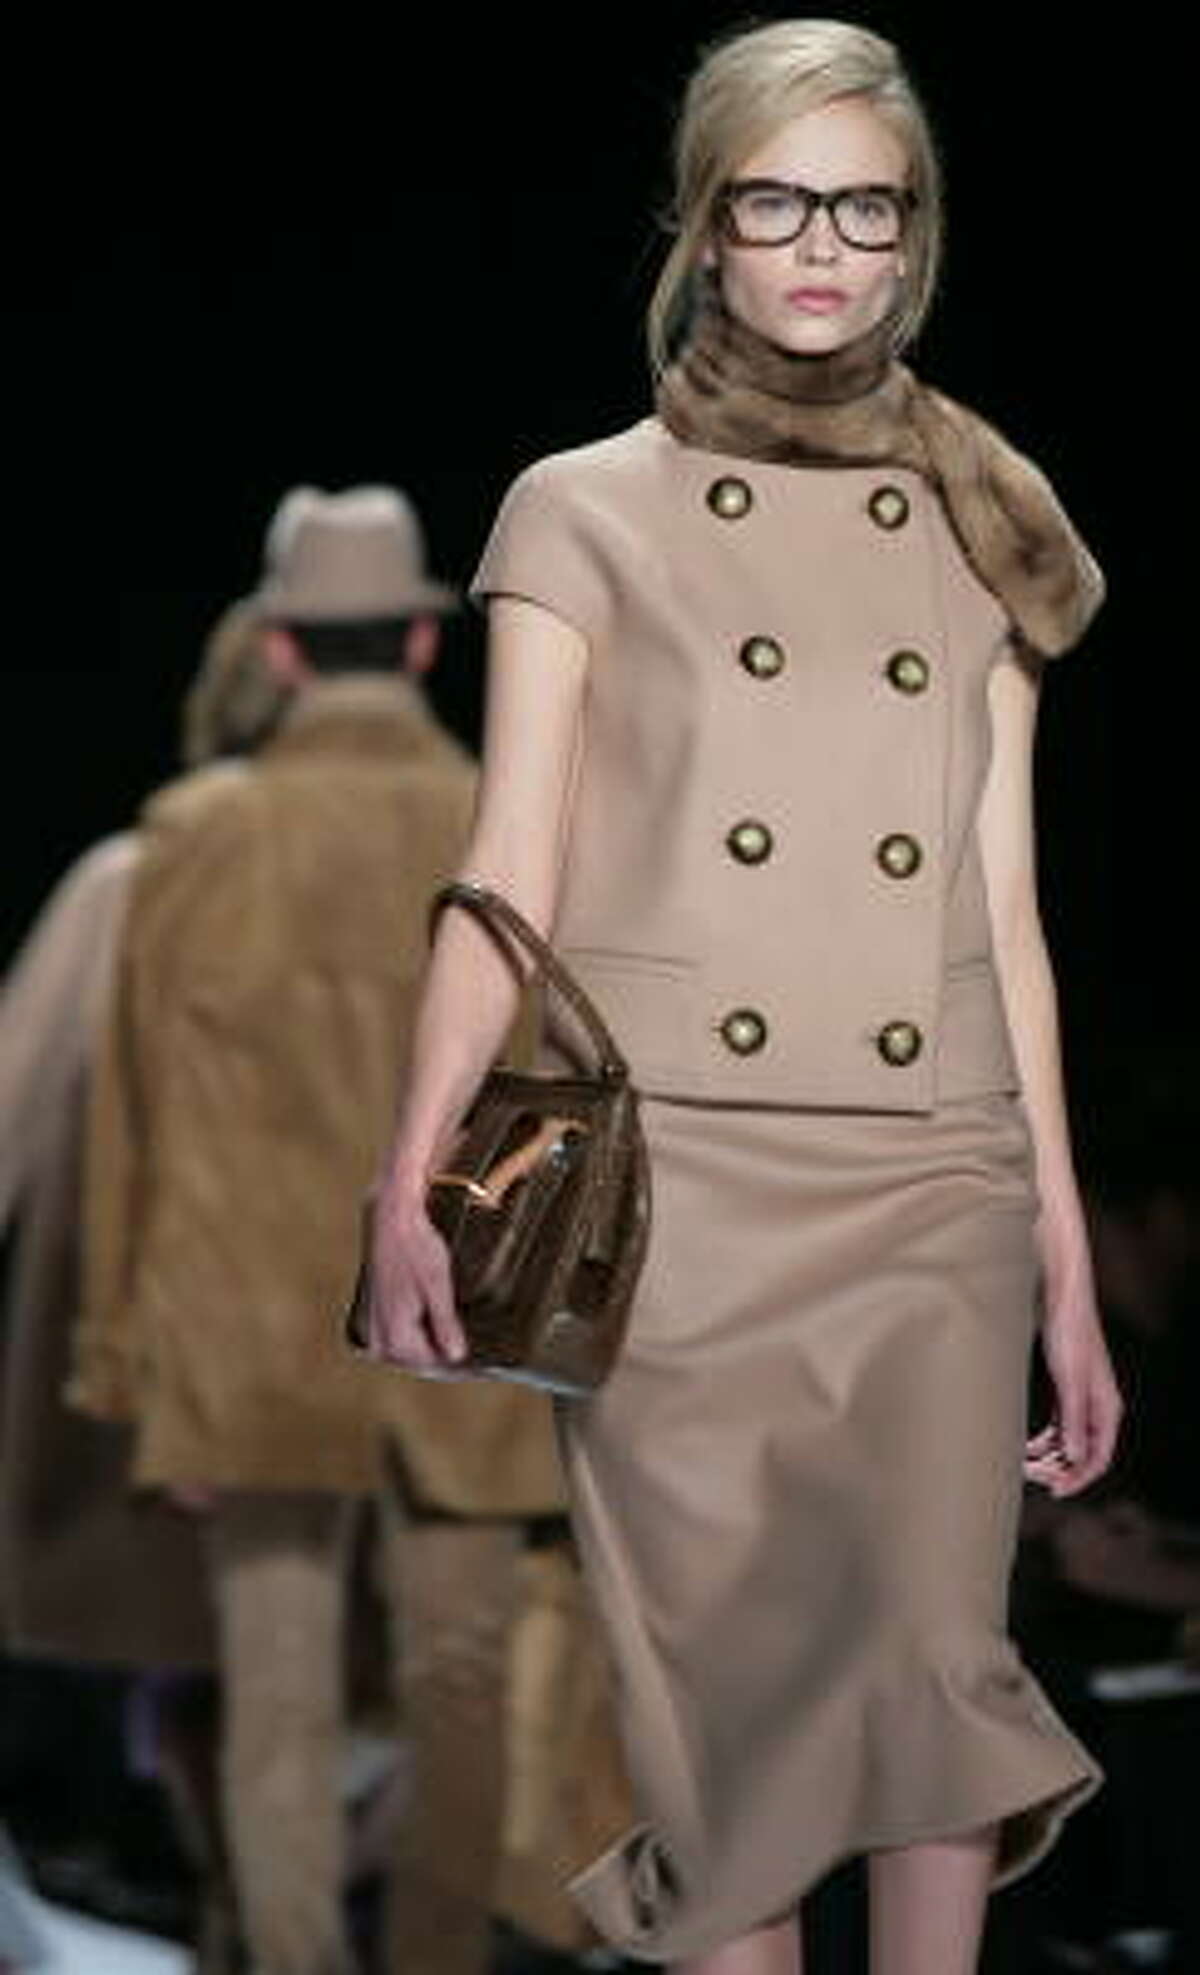 The Michael Kors 2008 fall collection paid homage to the Mad Men look of the early 1960s with a two-piece suit and boxy jacket.